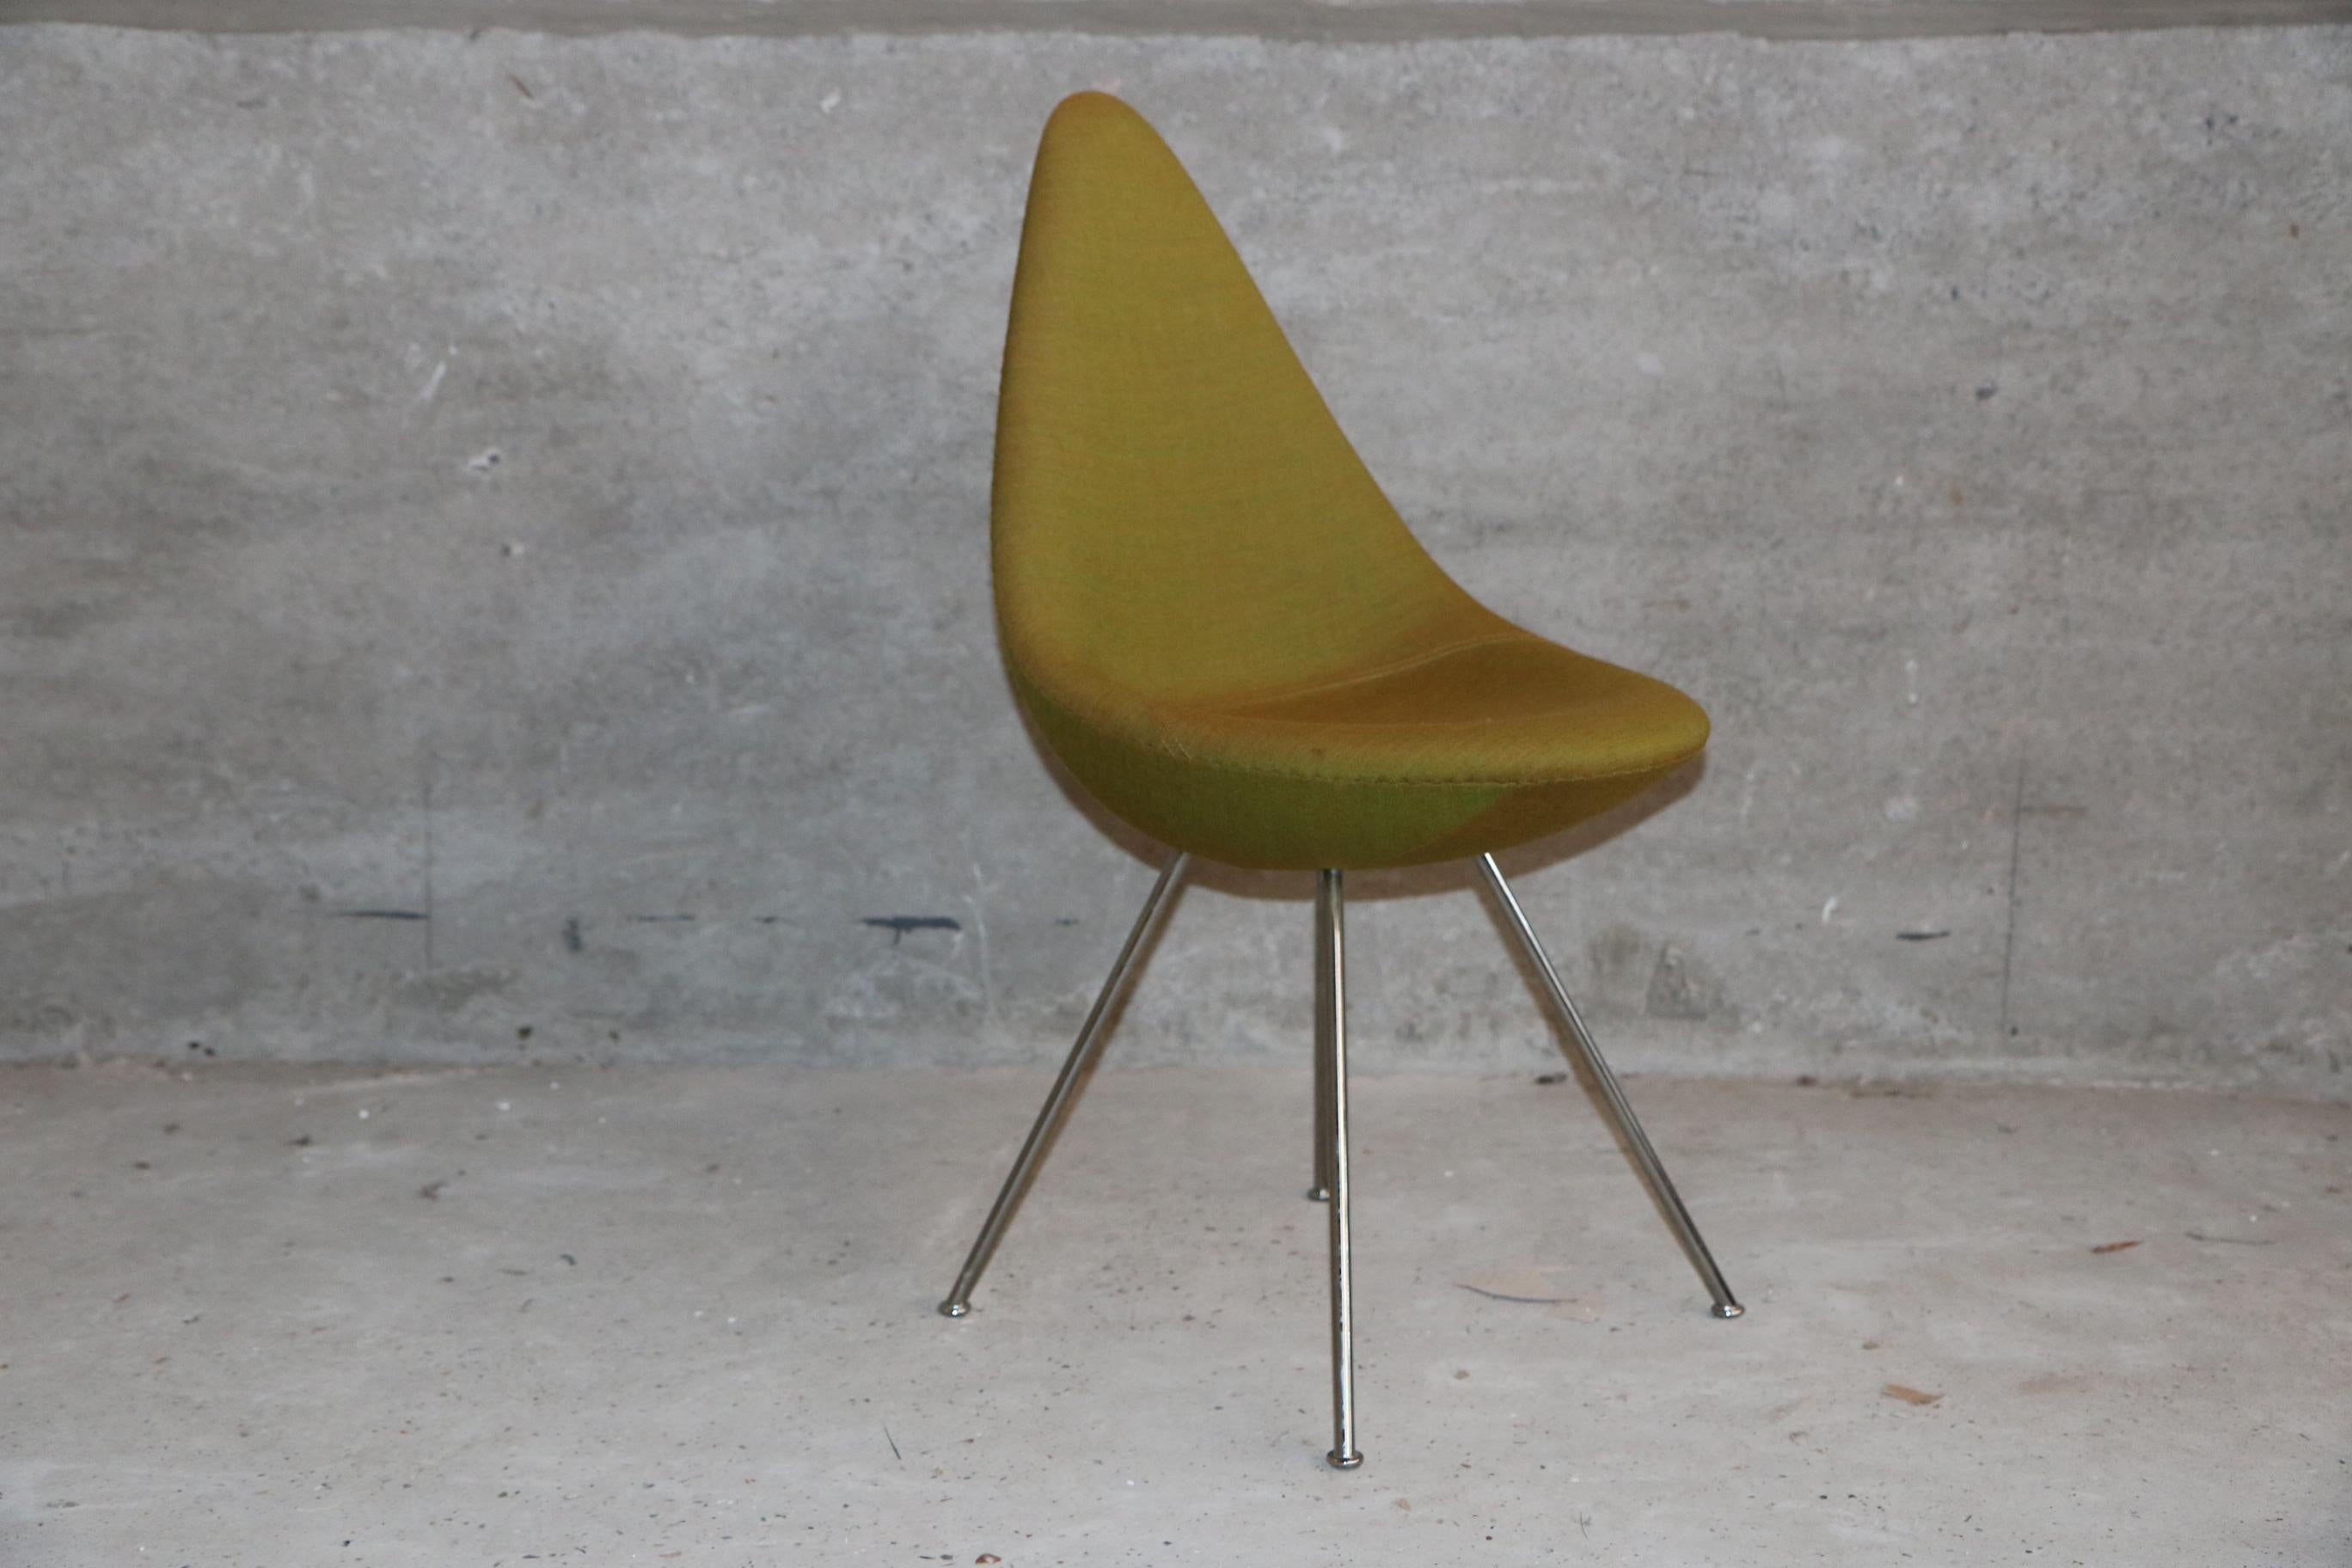 The fully upholstered Drop chair has a great elegancy and elevates an entire room with its beauty. 5 chairs available in original olive color fabric.
Designed in 1958 by Arne Jacobsen for the SAS Royal Hotel in Copenhagen.